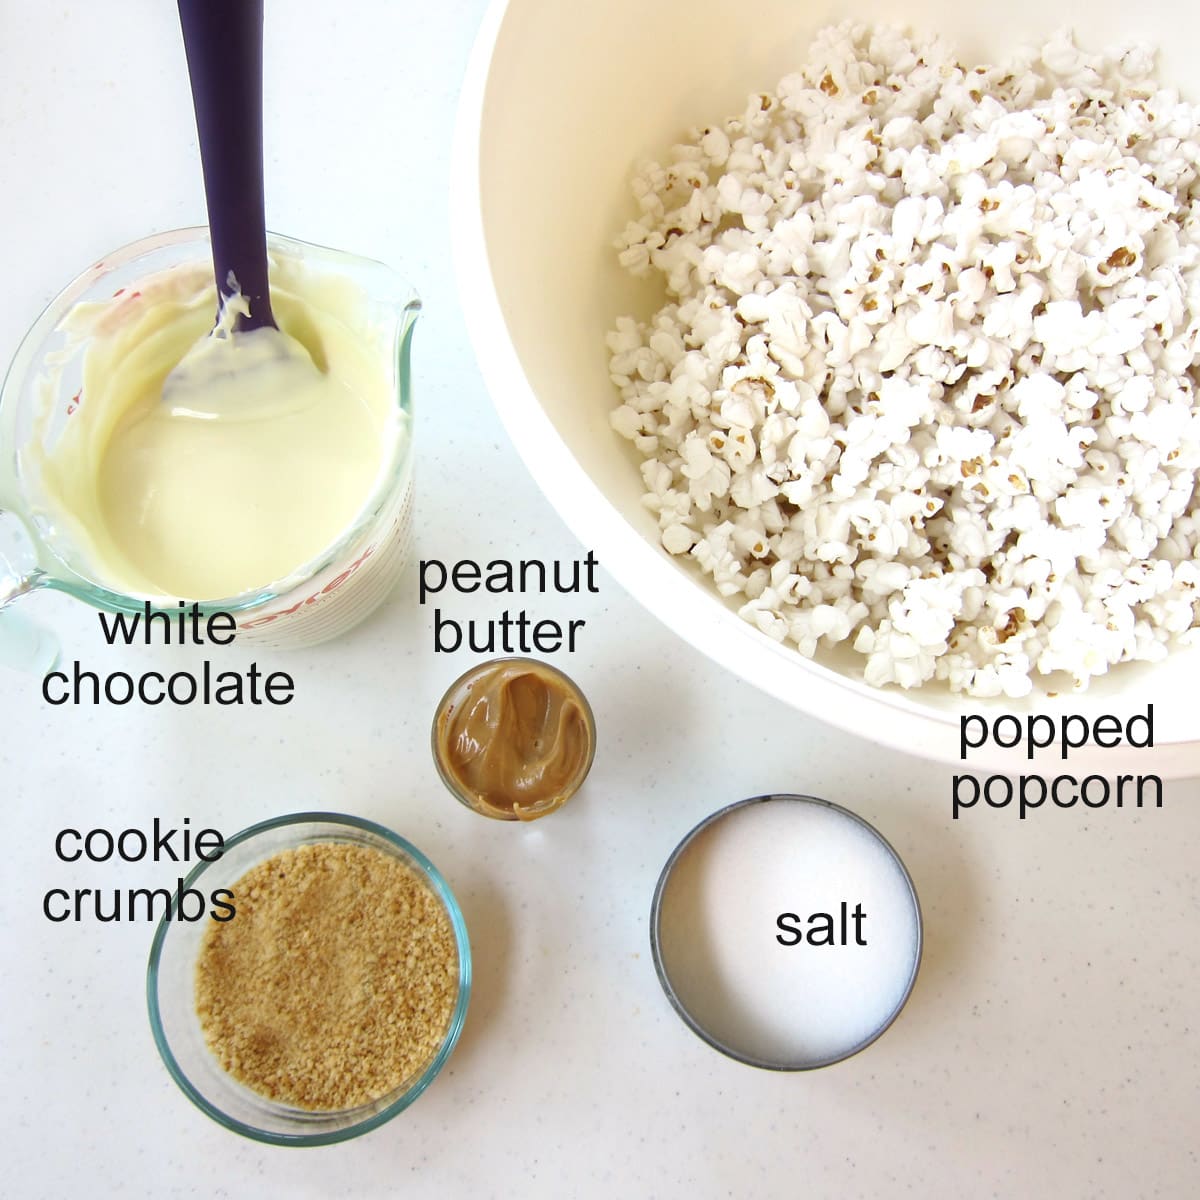 beach party popcorn ingredients including white chocolate, peanut butter, salt, cookie crumbs, and popcorn.